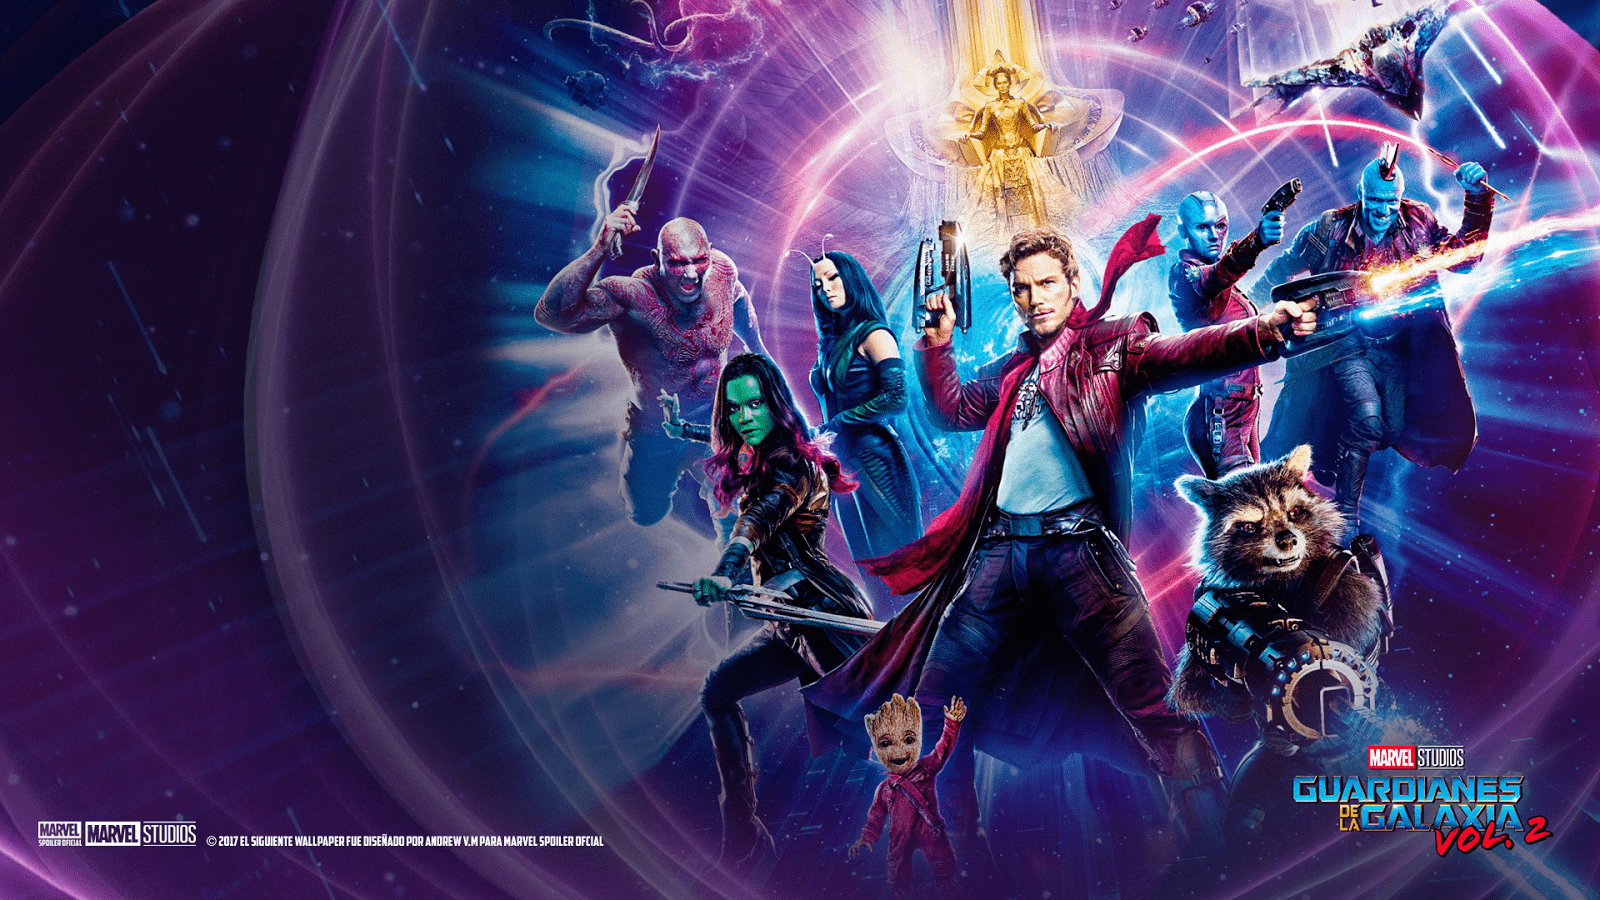 Guardians of the Galaxy 2 Wallpapers - Top Free Guardians of the Galaxy ...